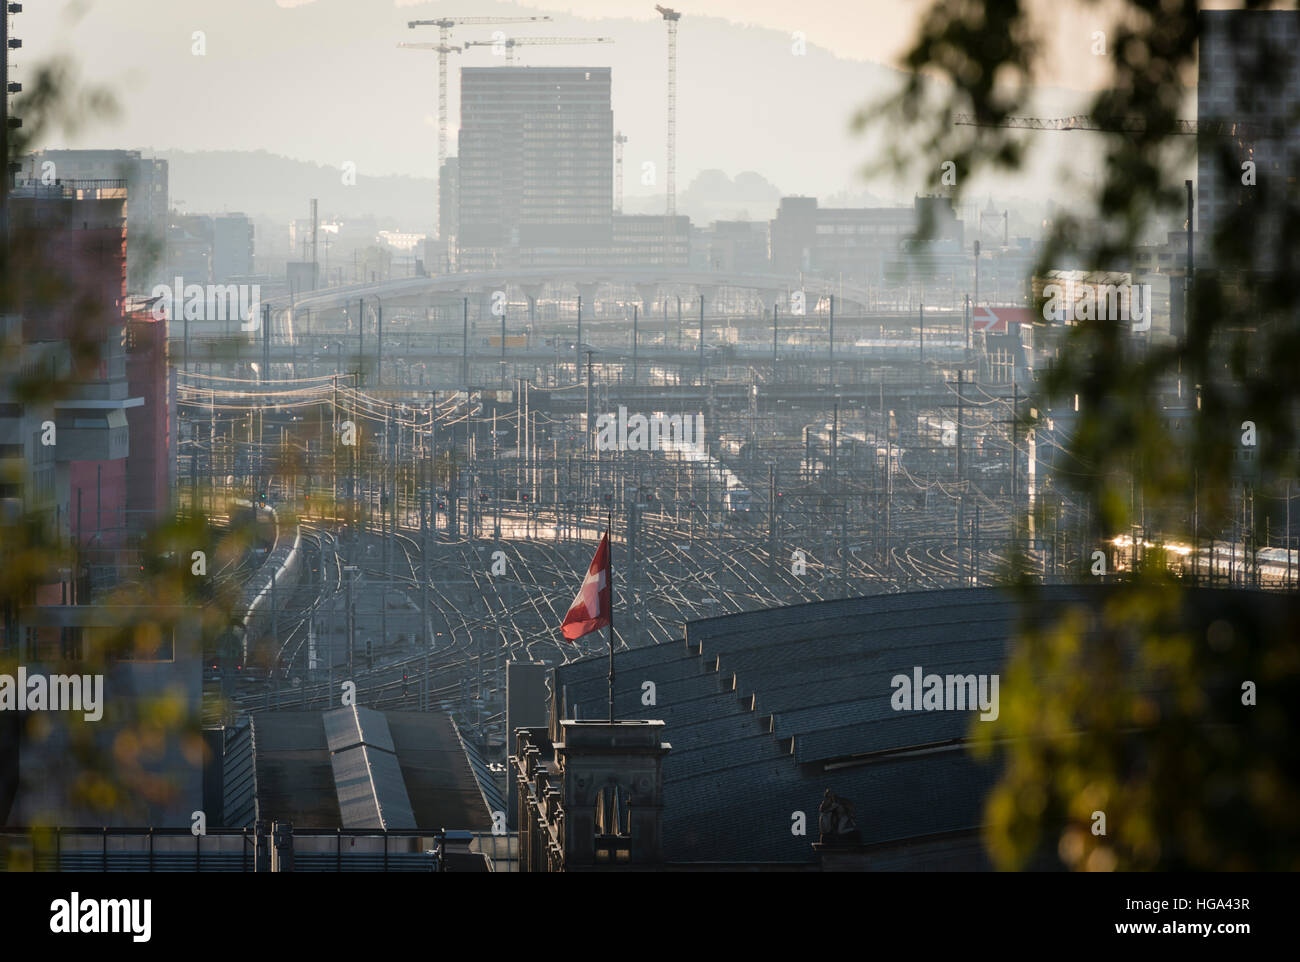 The Swiss flag is flying in the sunset on top of Zurich main station, one of Europe's busiest railway stations. Stock Photo